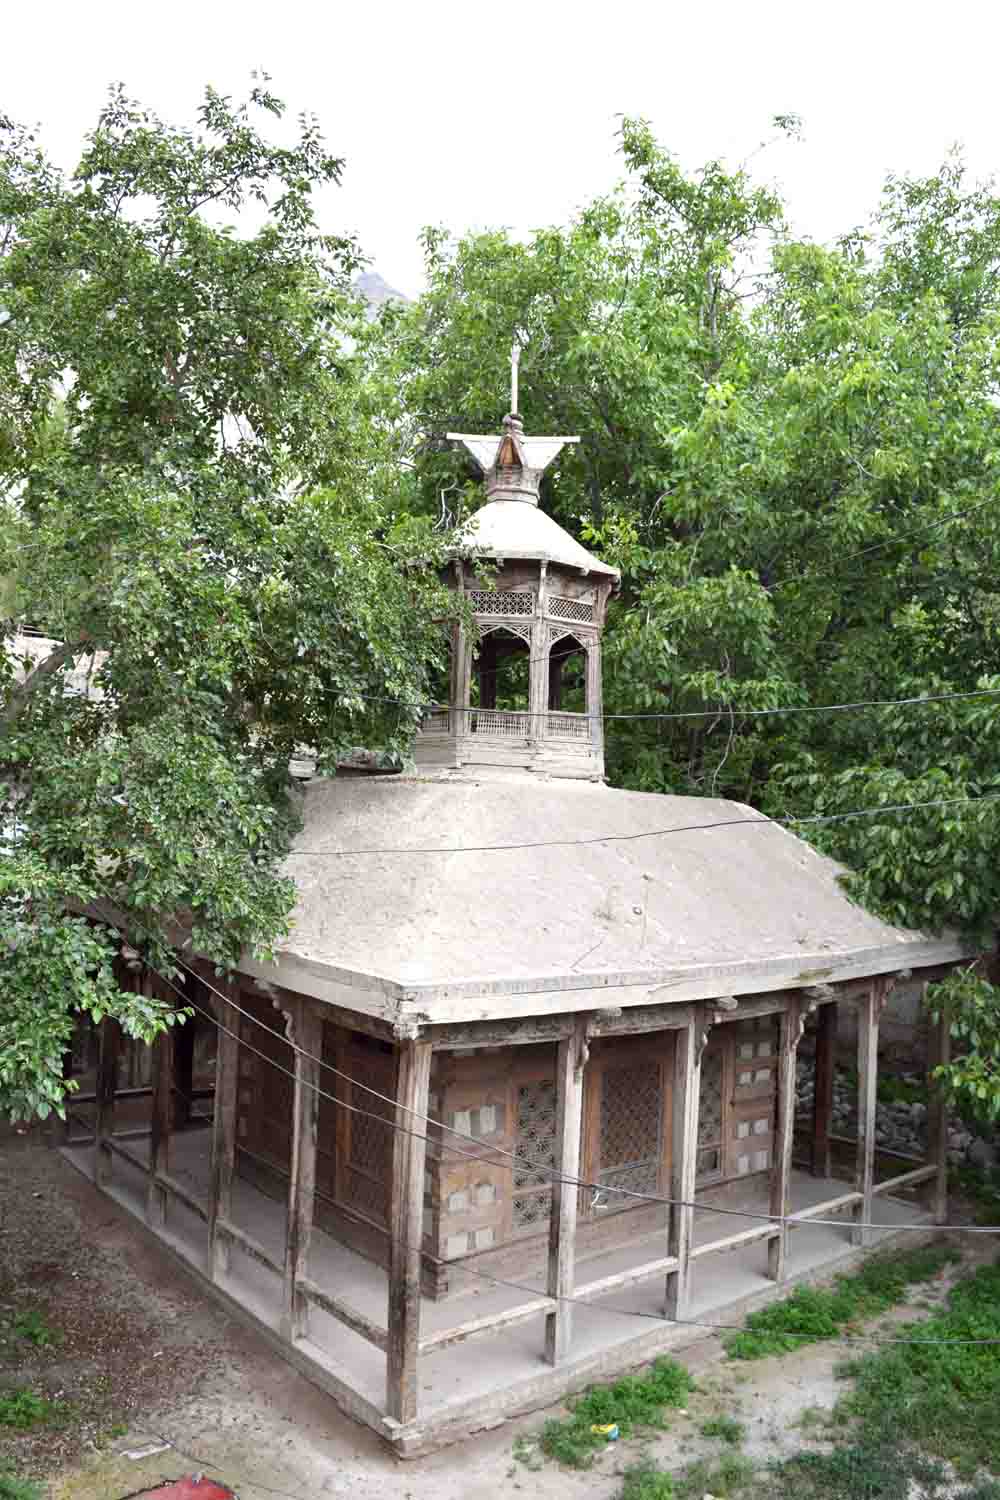 The 18th century tomb, now a UNESCO protected site